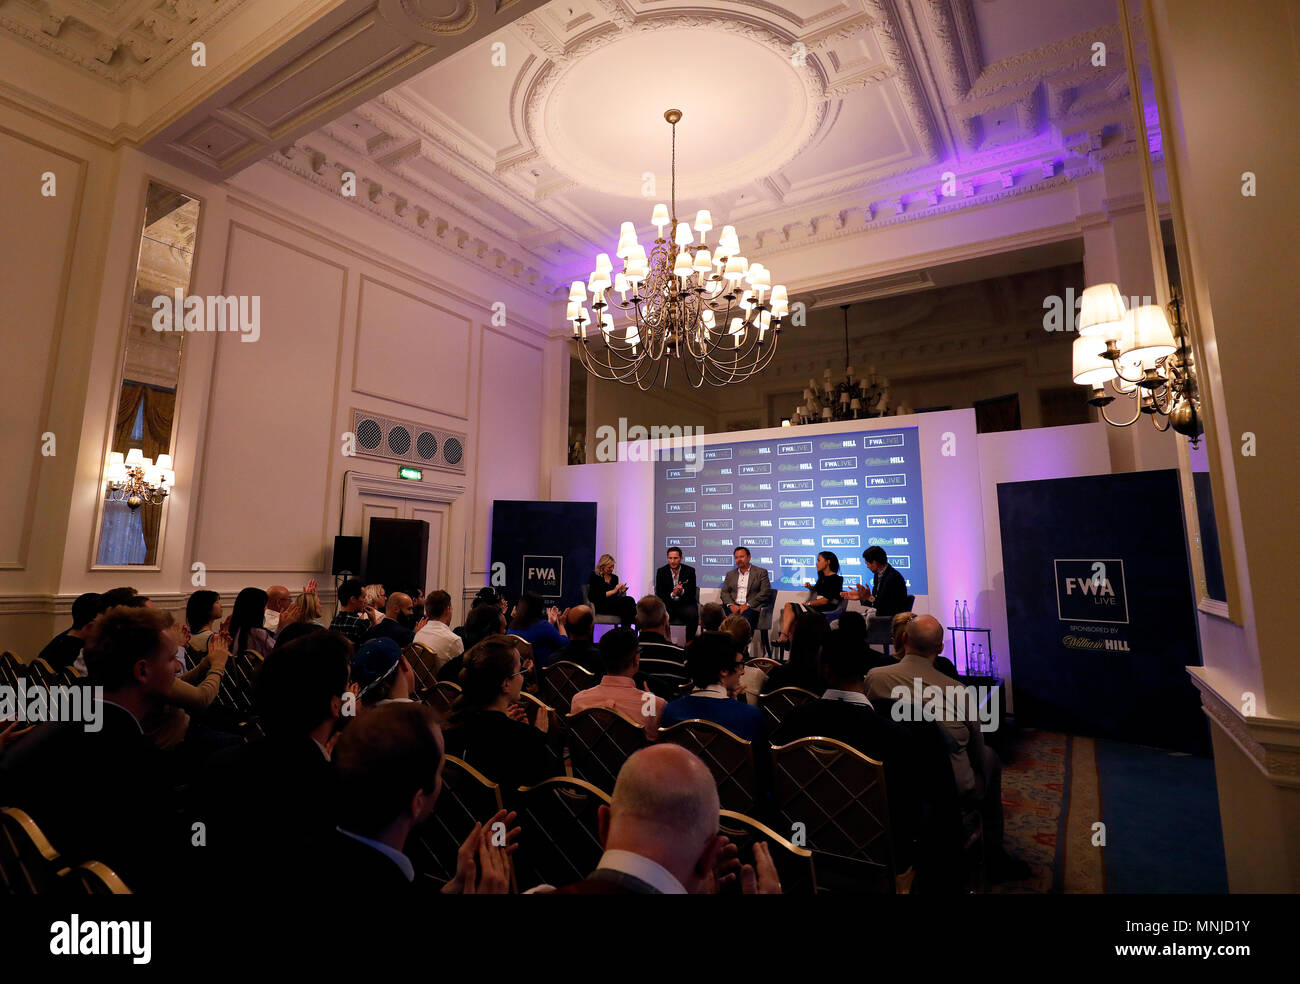 (Left to right) Carrie Brown journalist, Frank Lampard former England international and Chelsea player, Paul McCarthy Executive Secretary of the FWA, Alex Scott former England international and Arsenal Ladies player and Neil Ashton journalist during the William Hill FWA Live event at the Landmark Hotel, London. Stock Photo